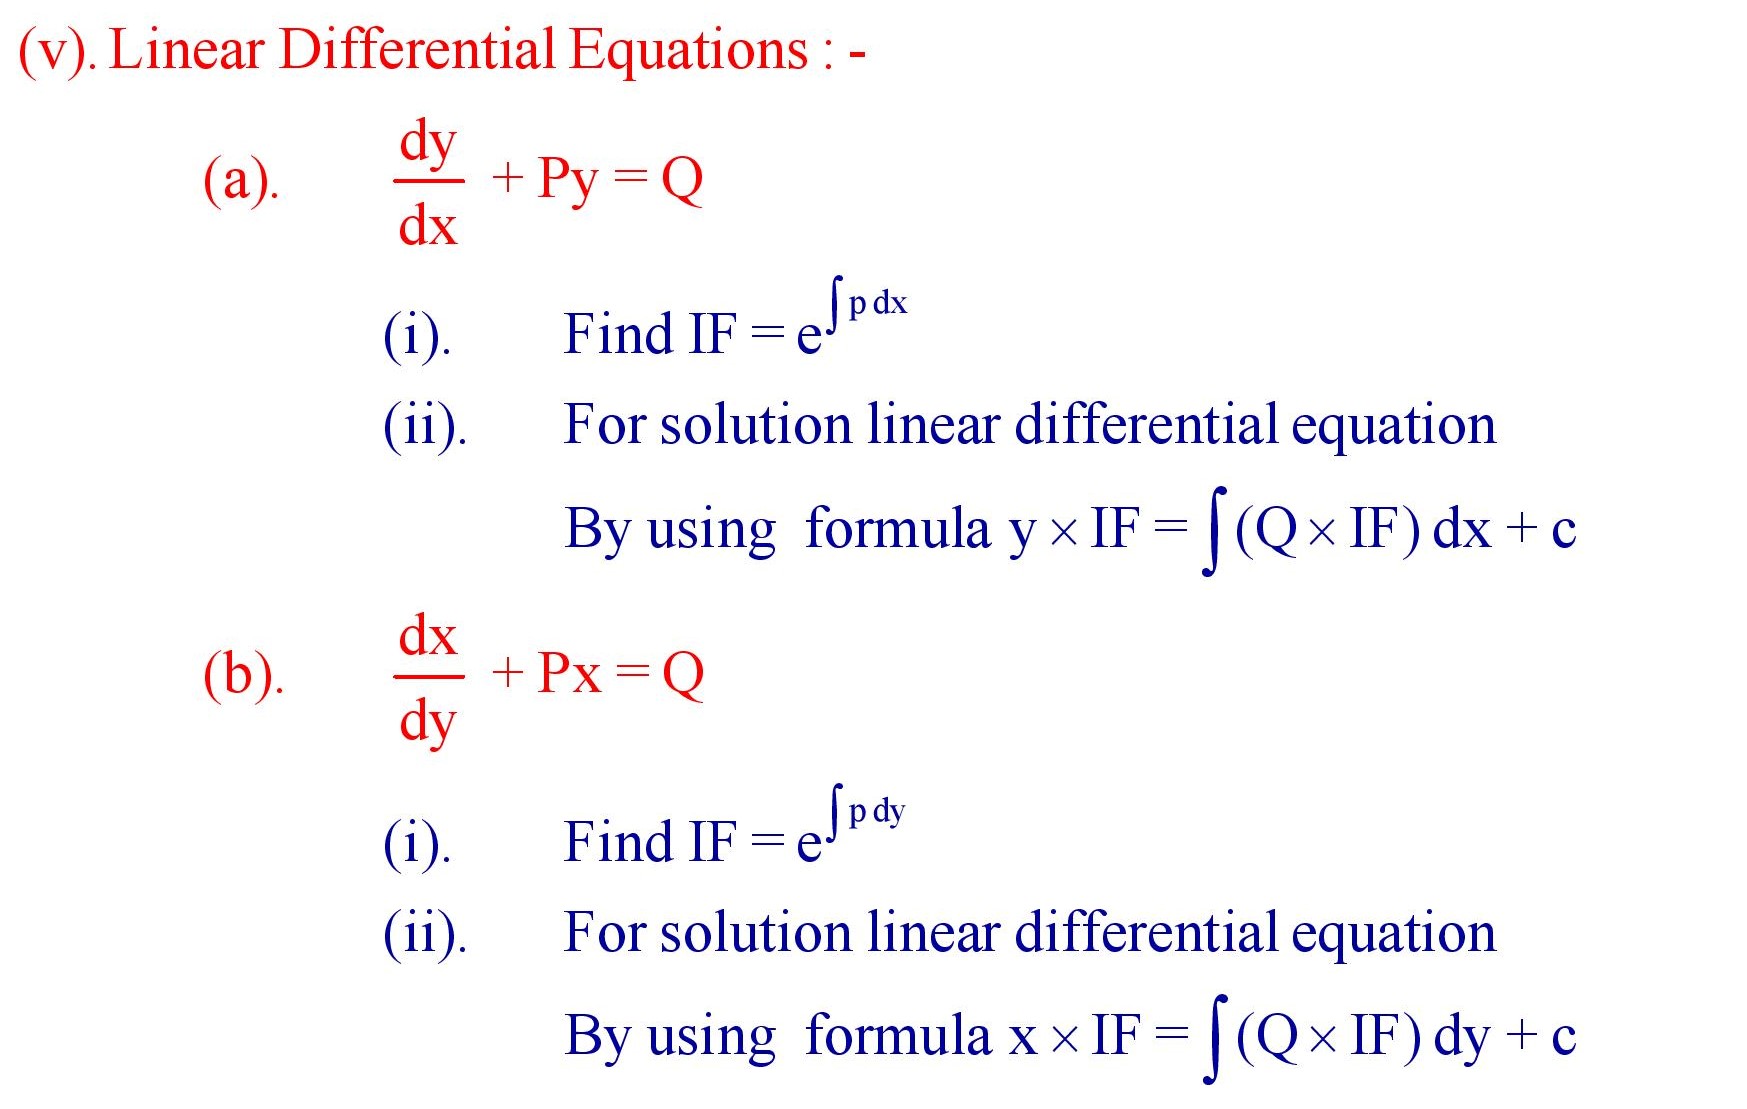 Differential equation of homogeneous type an equation in x and y is said to be homogeneous